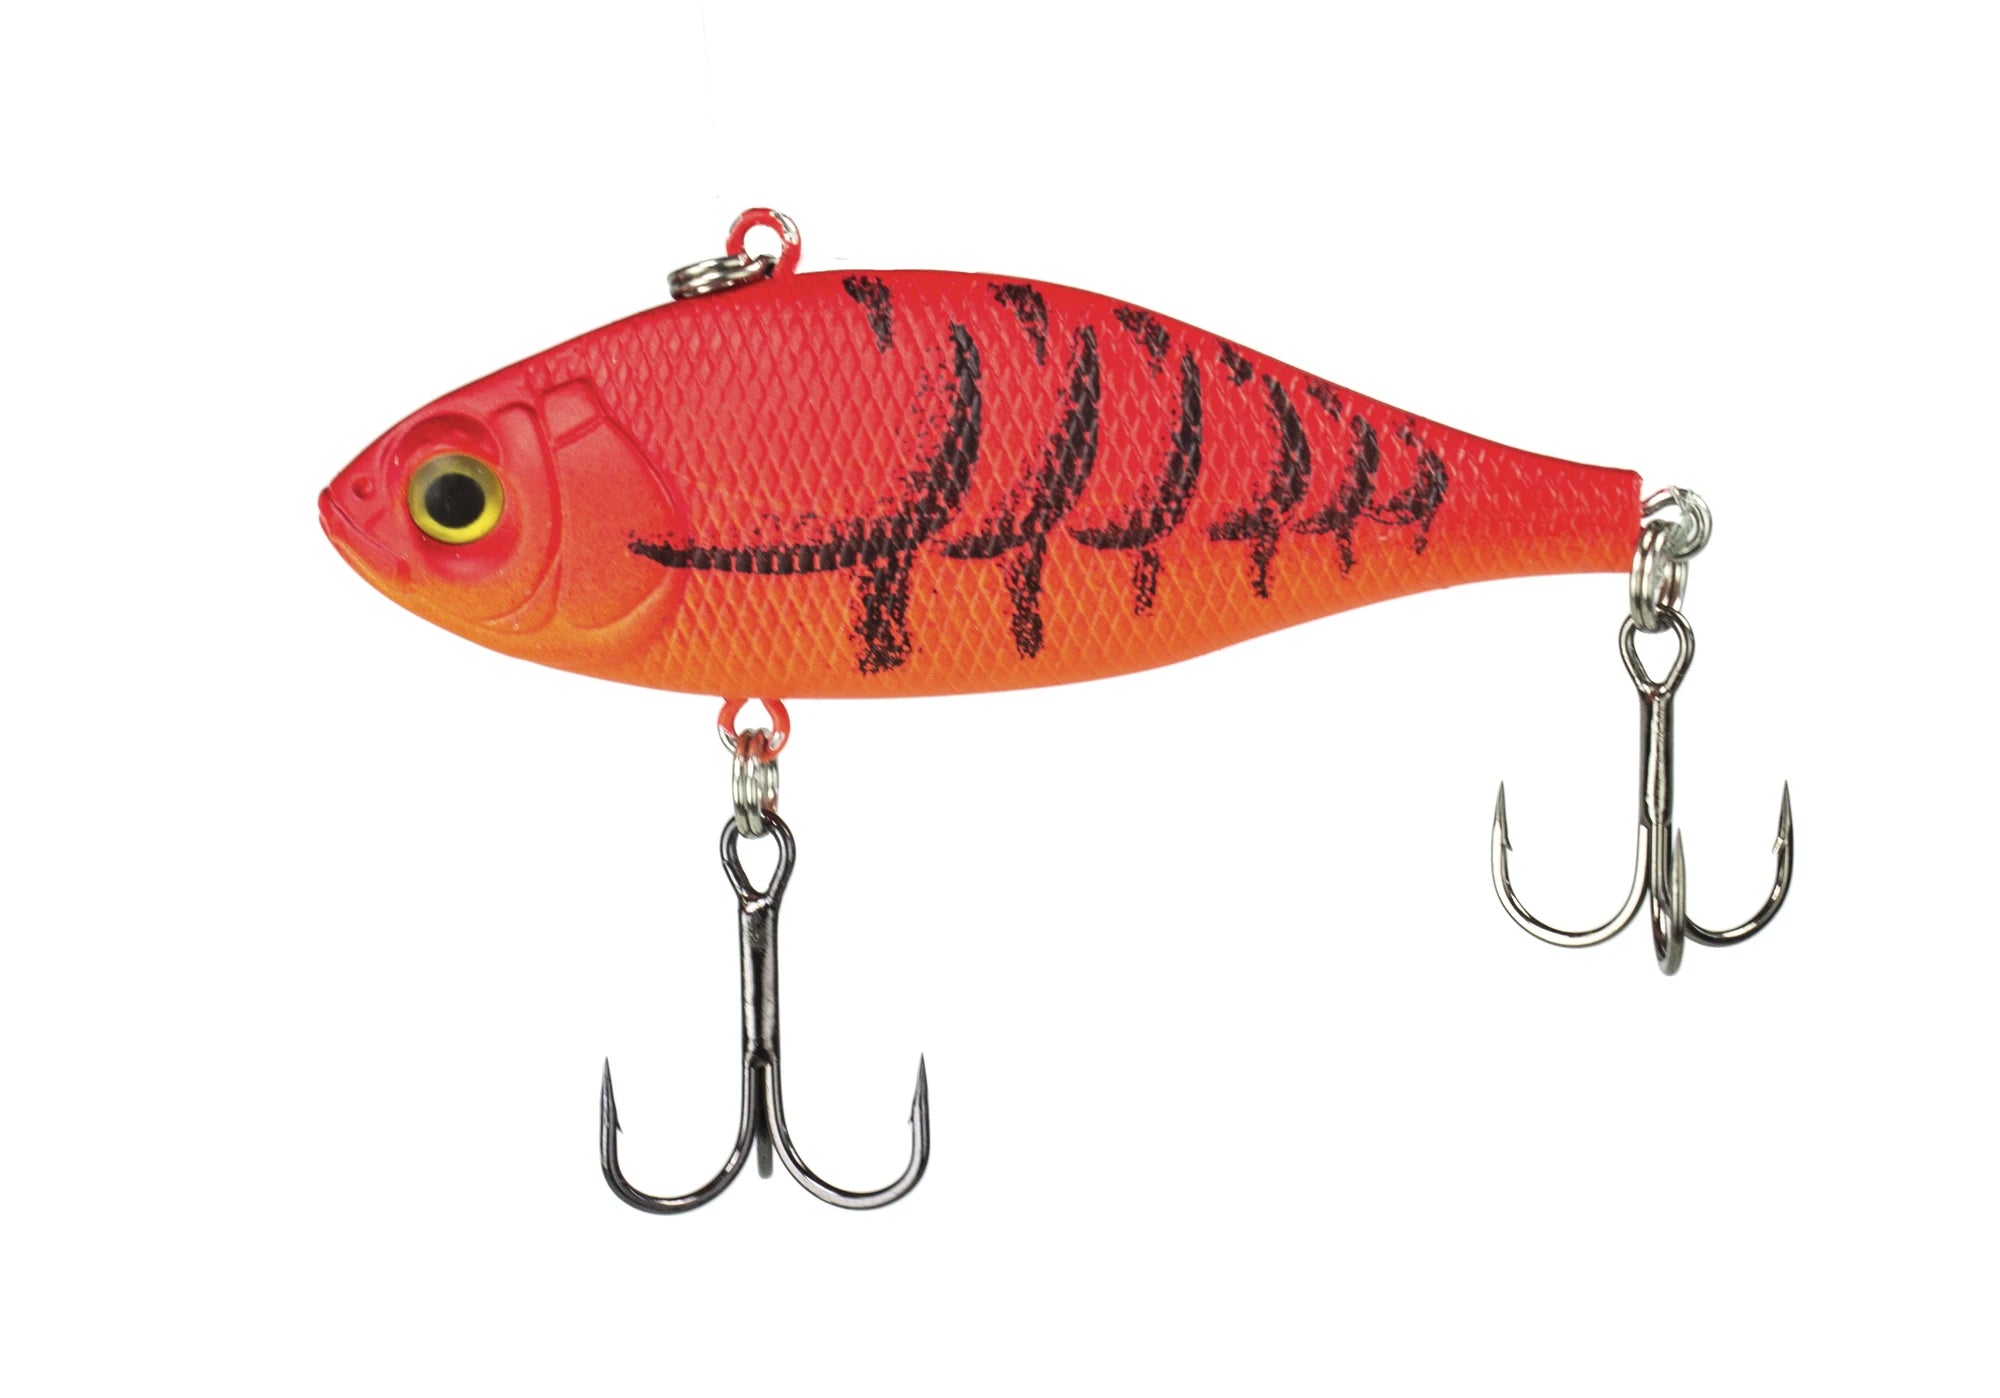 Buy Lunkerhunt - Topwater Fishing Lures for Bass Trout Fishing